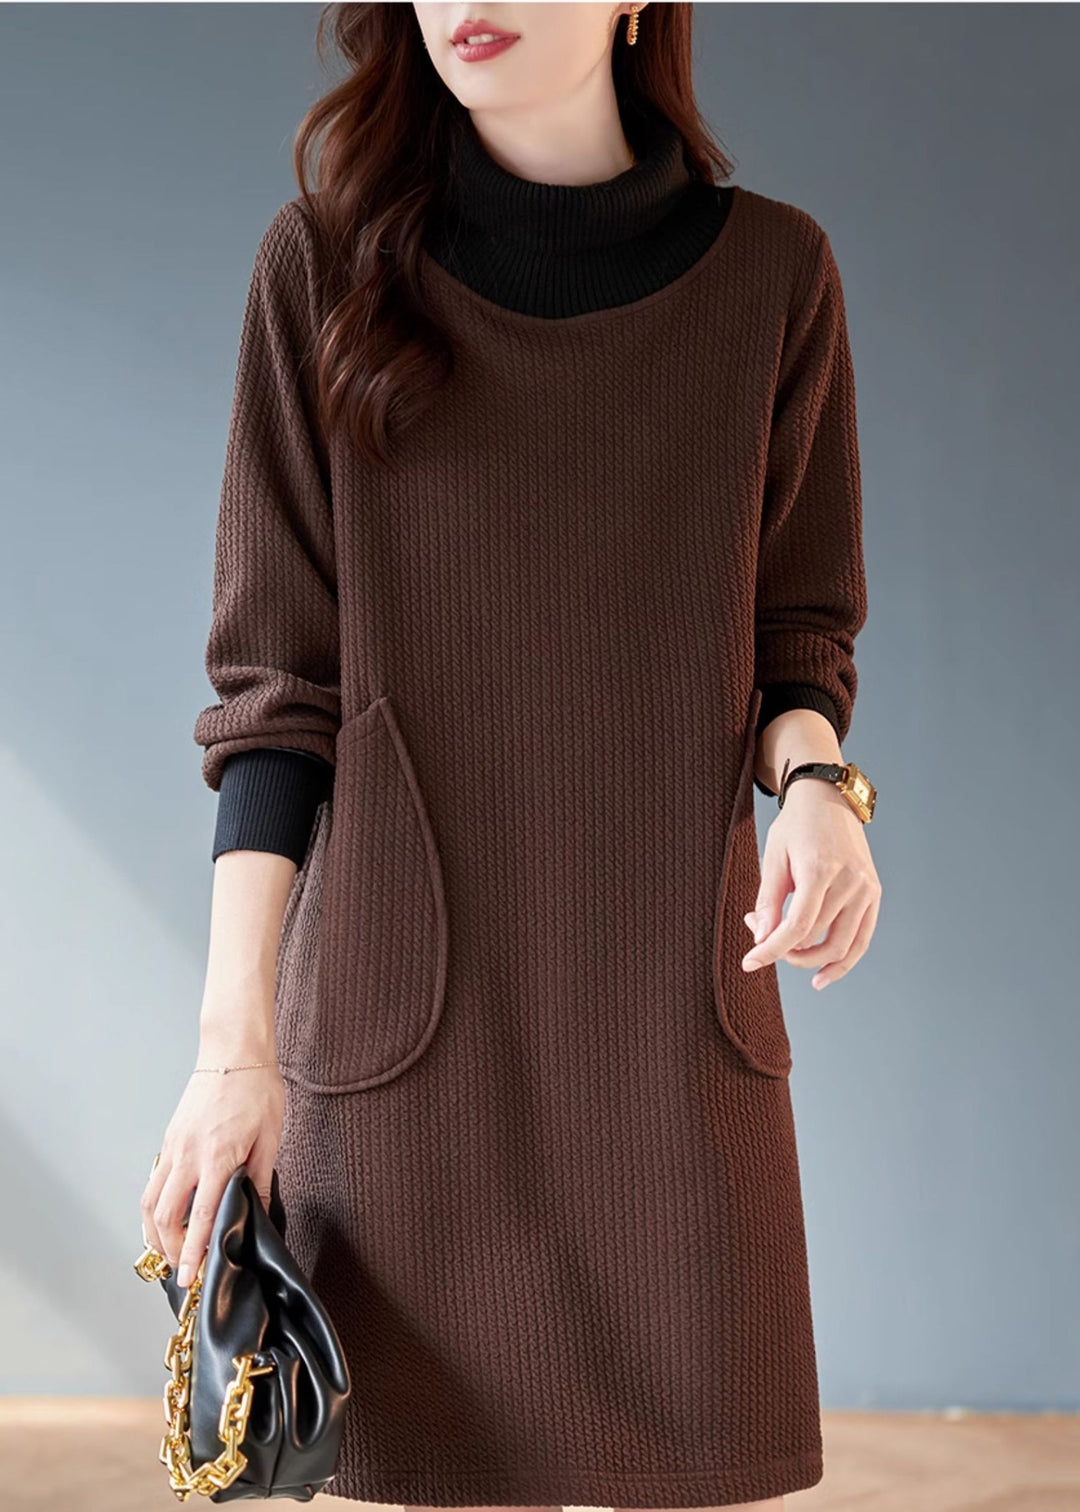 Classy Chocolate High Neck Patchwork Thick Knit Dress Spring